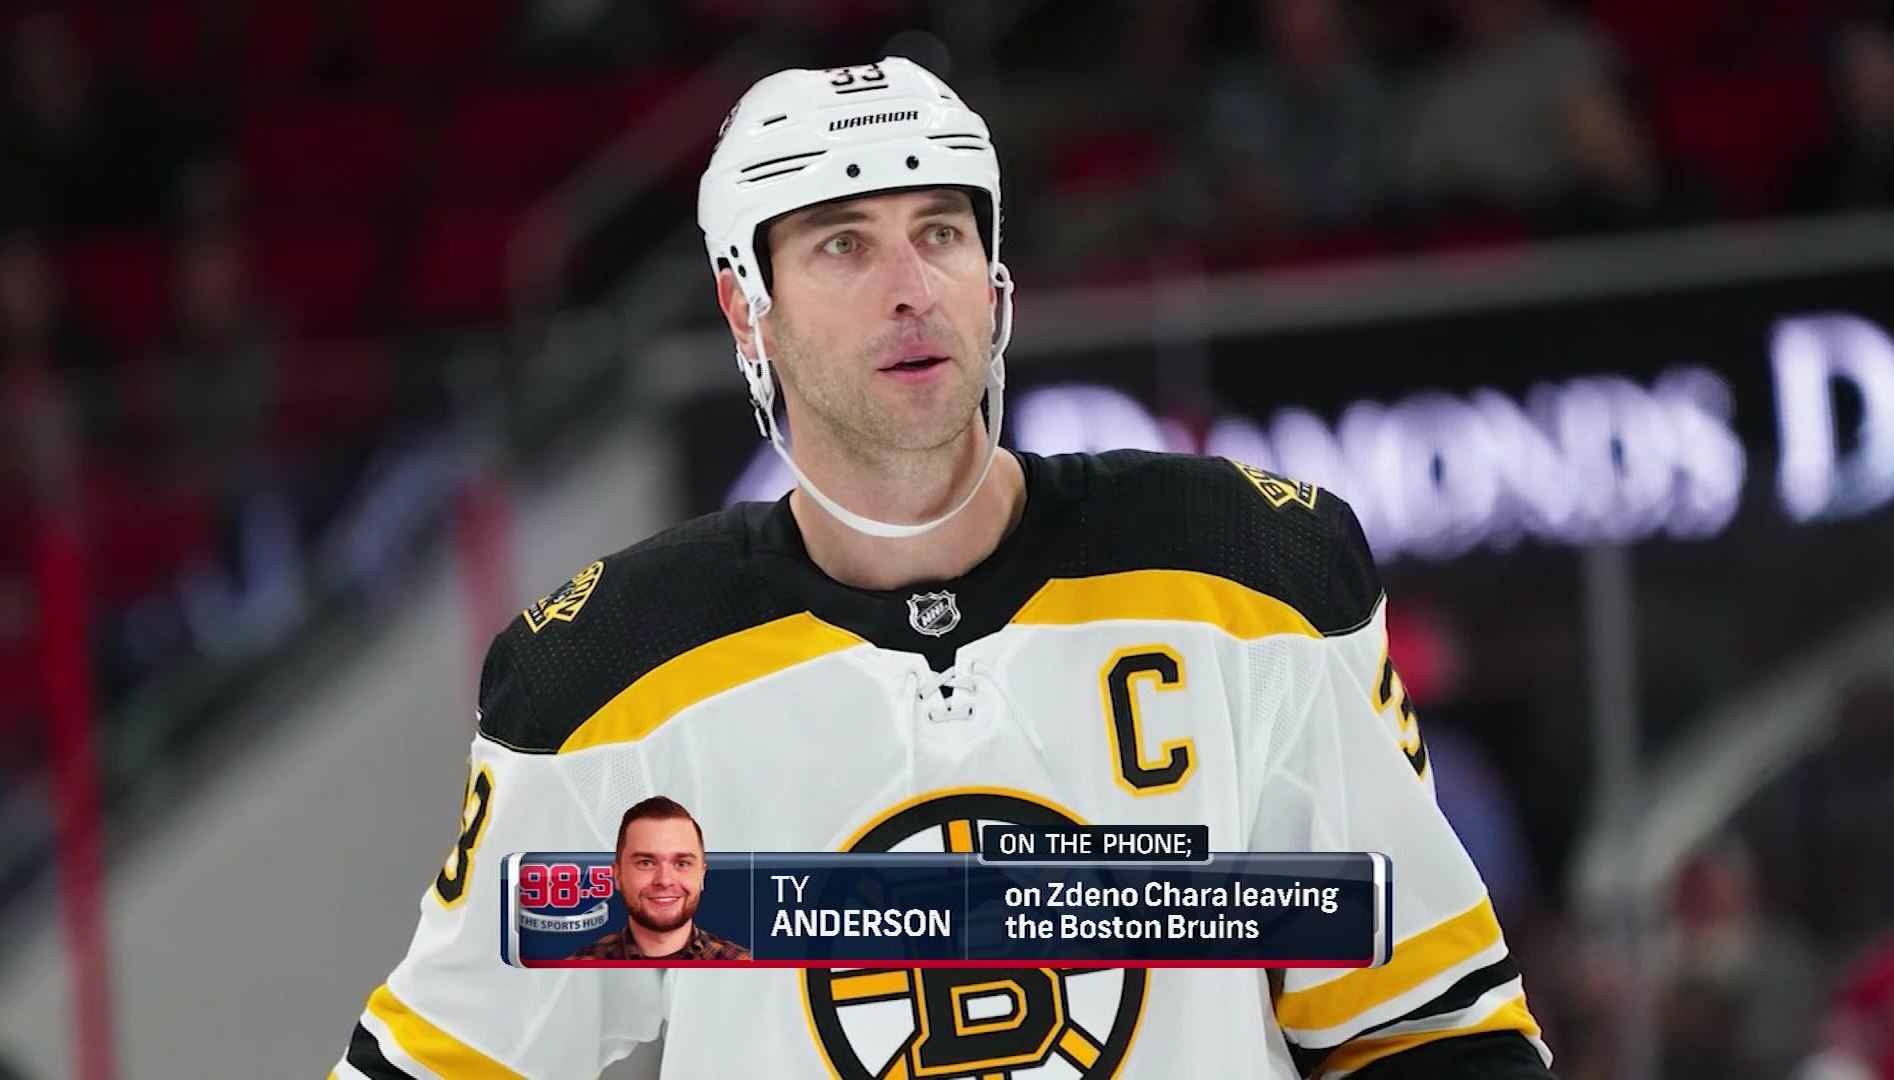 Kpncl9b2vfk5em https www nbcboston com news sports nbcsports nhl twitter explodes with reaction to zdeno chara leaving bruins to join capitals 2268941